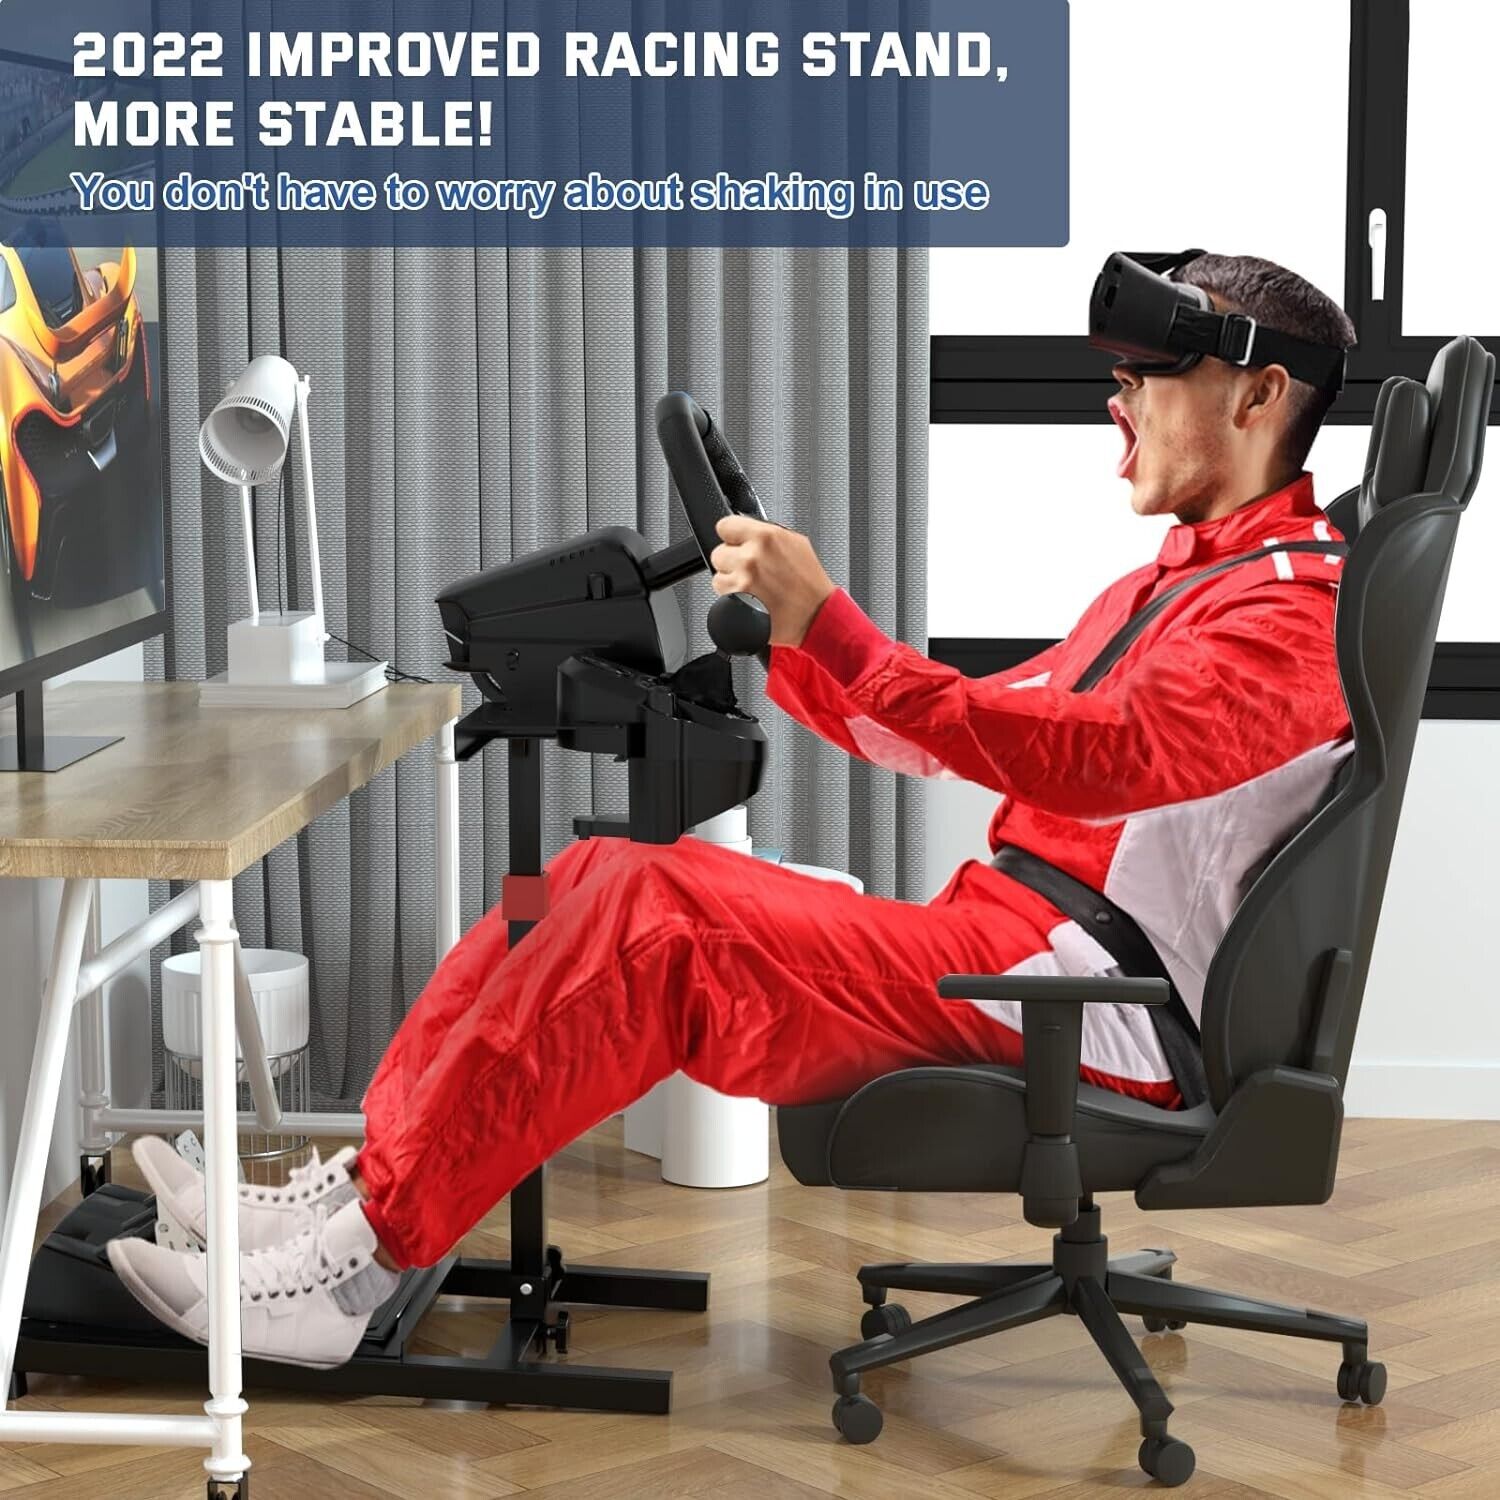 DWS Driving Game Sim Racing Frame Stand for Wheel Pedals - Foldable Racing Wheel Stand for Logitech G29/G920/G923, for Thrustmaster T248/T300/Ferrari 458/T150/T80 PS5 PS4 XBOX PC